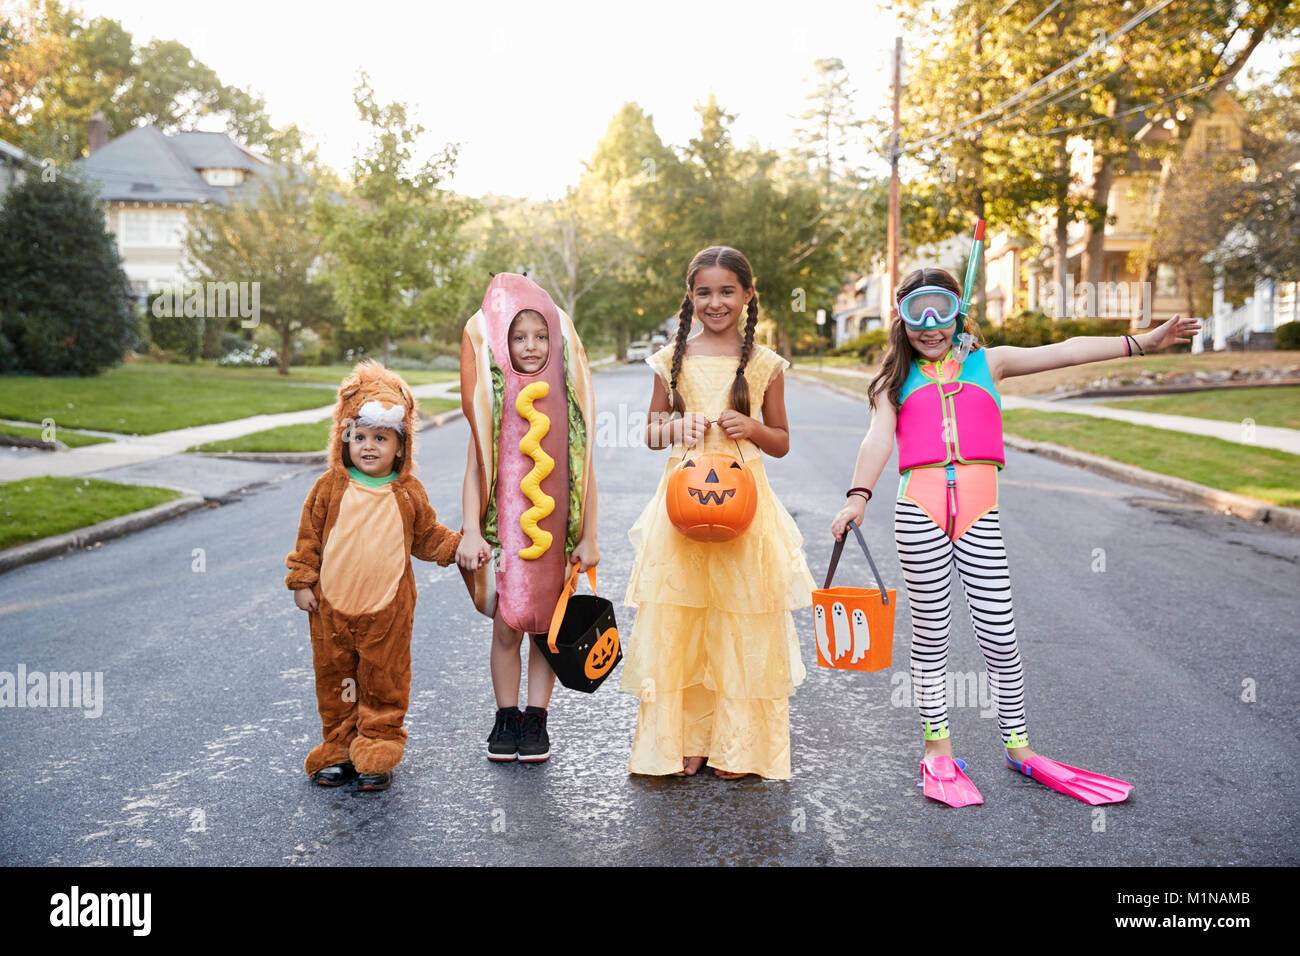 Children Wearing Halloween Costumes For Trick Or Treating Stock Photo ...